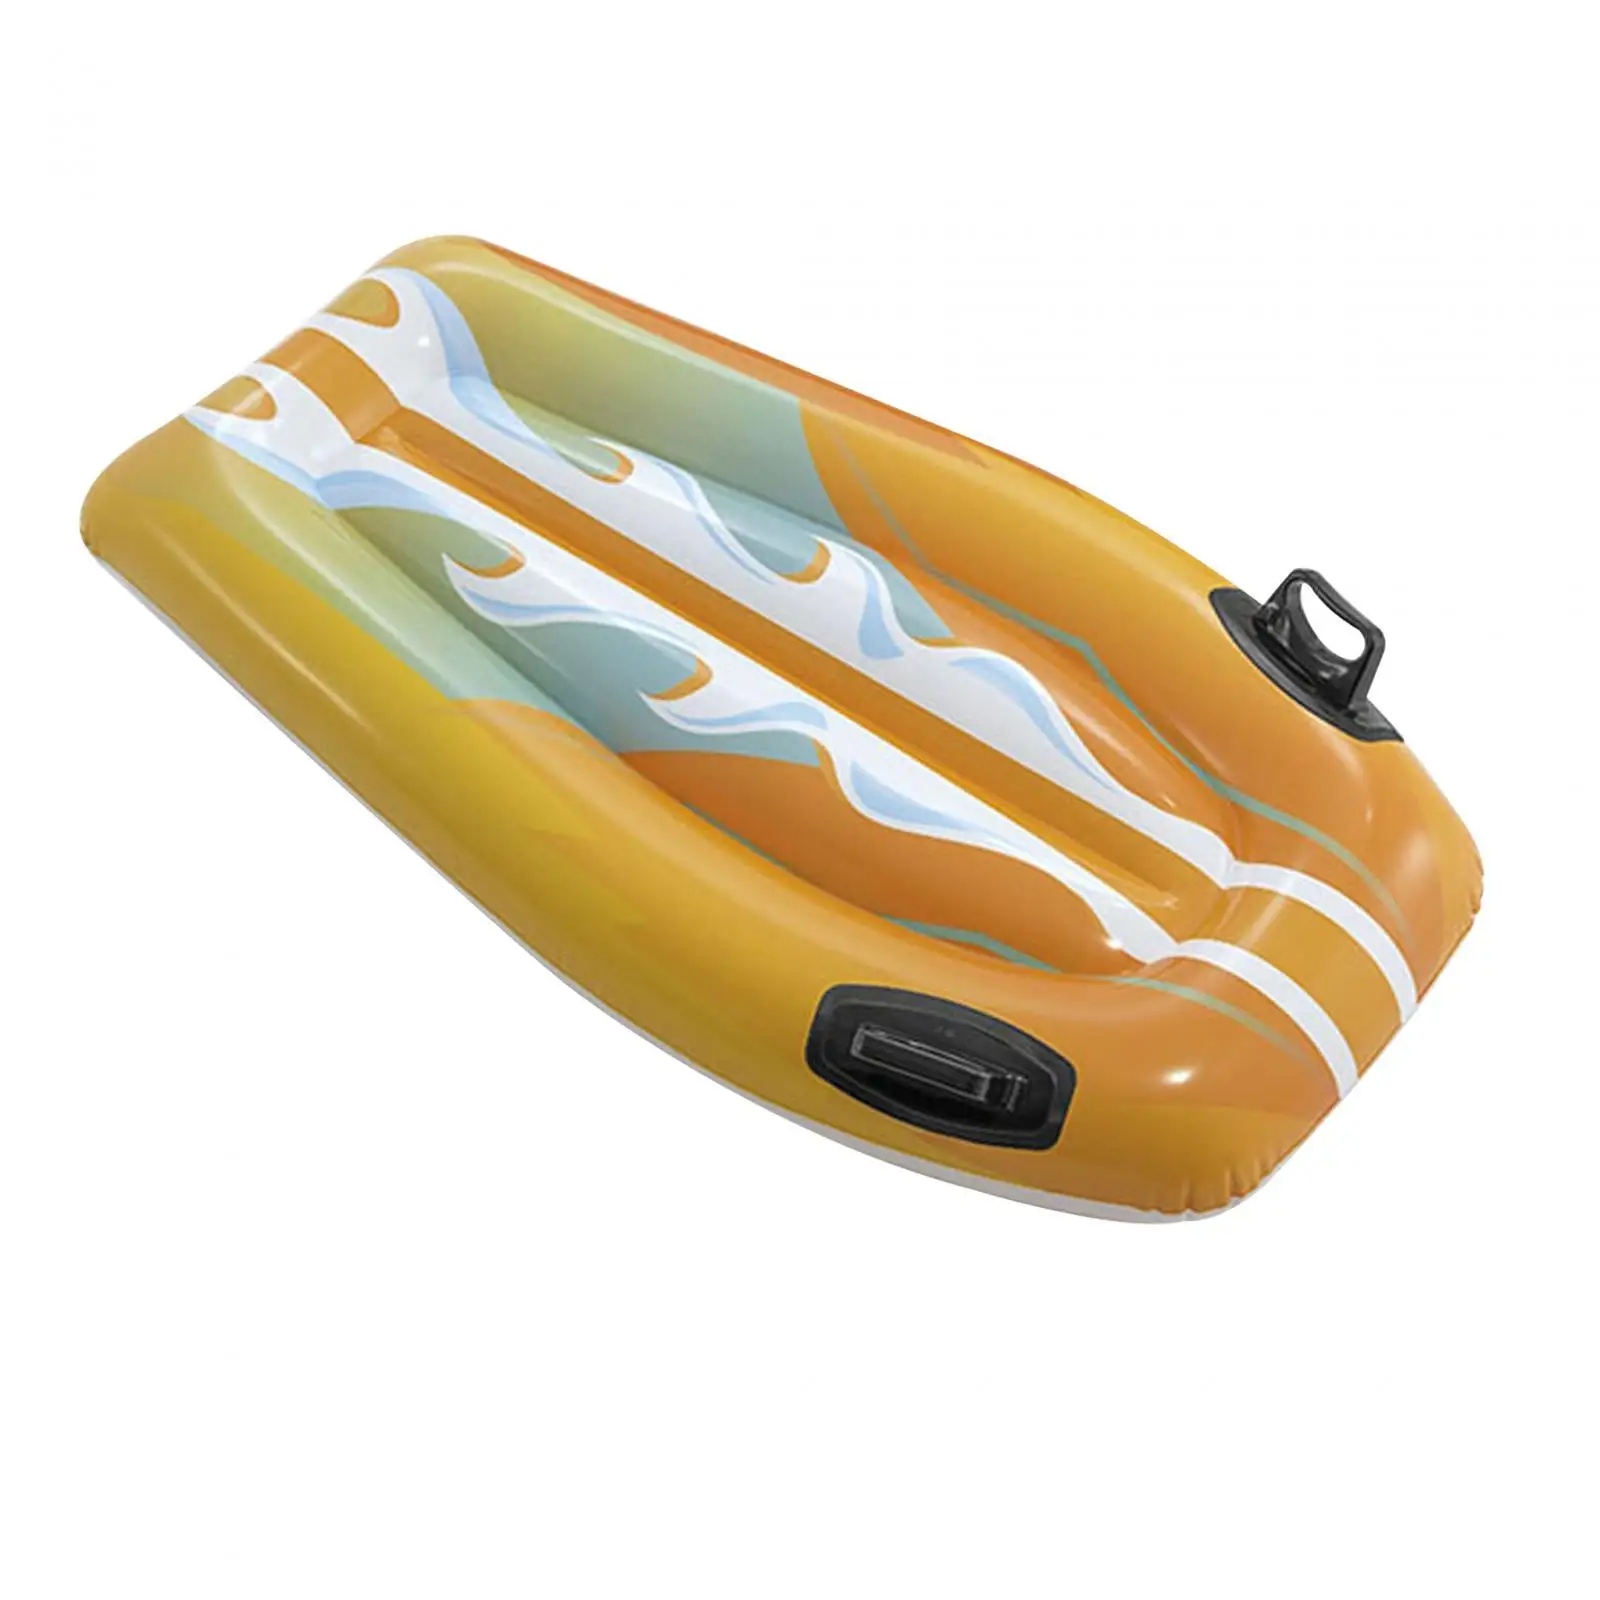 Inflatable Surfboard for Kids Floating Surfboard Portable Inflatable